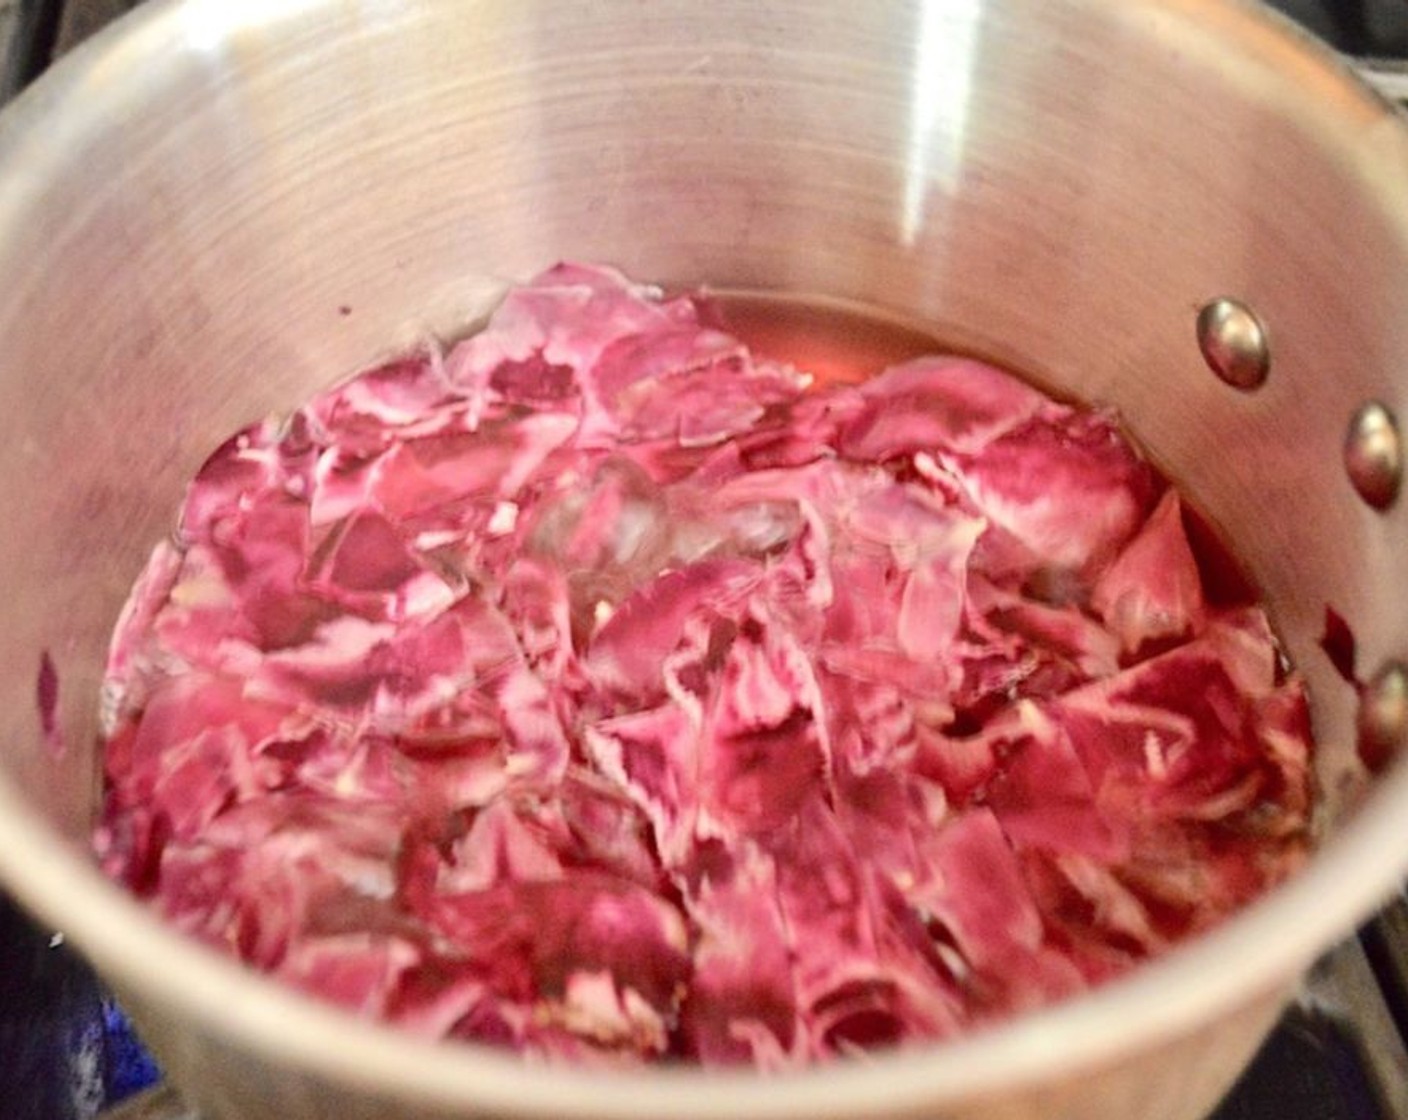 step 1 Combine the Fresh Rose Petals (2 cups) and Water (1 1/2 cups) in a medium saucepan and bring them to a gentle boil over medium heat. Let it gently simmer for 10 minutes.